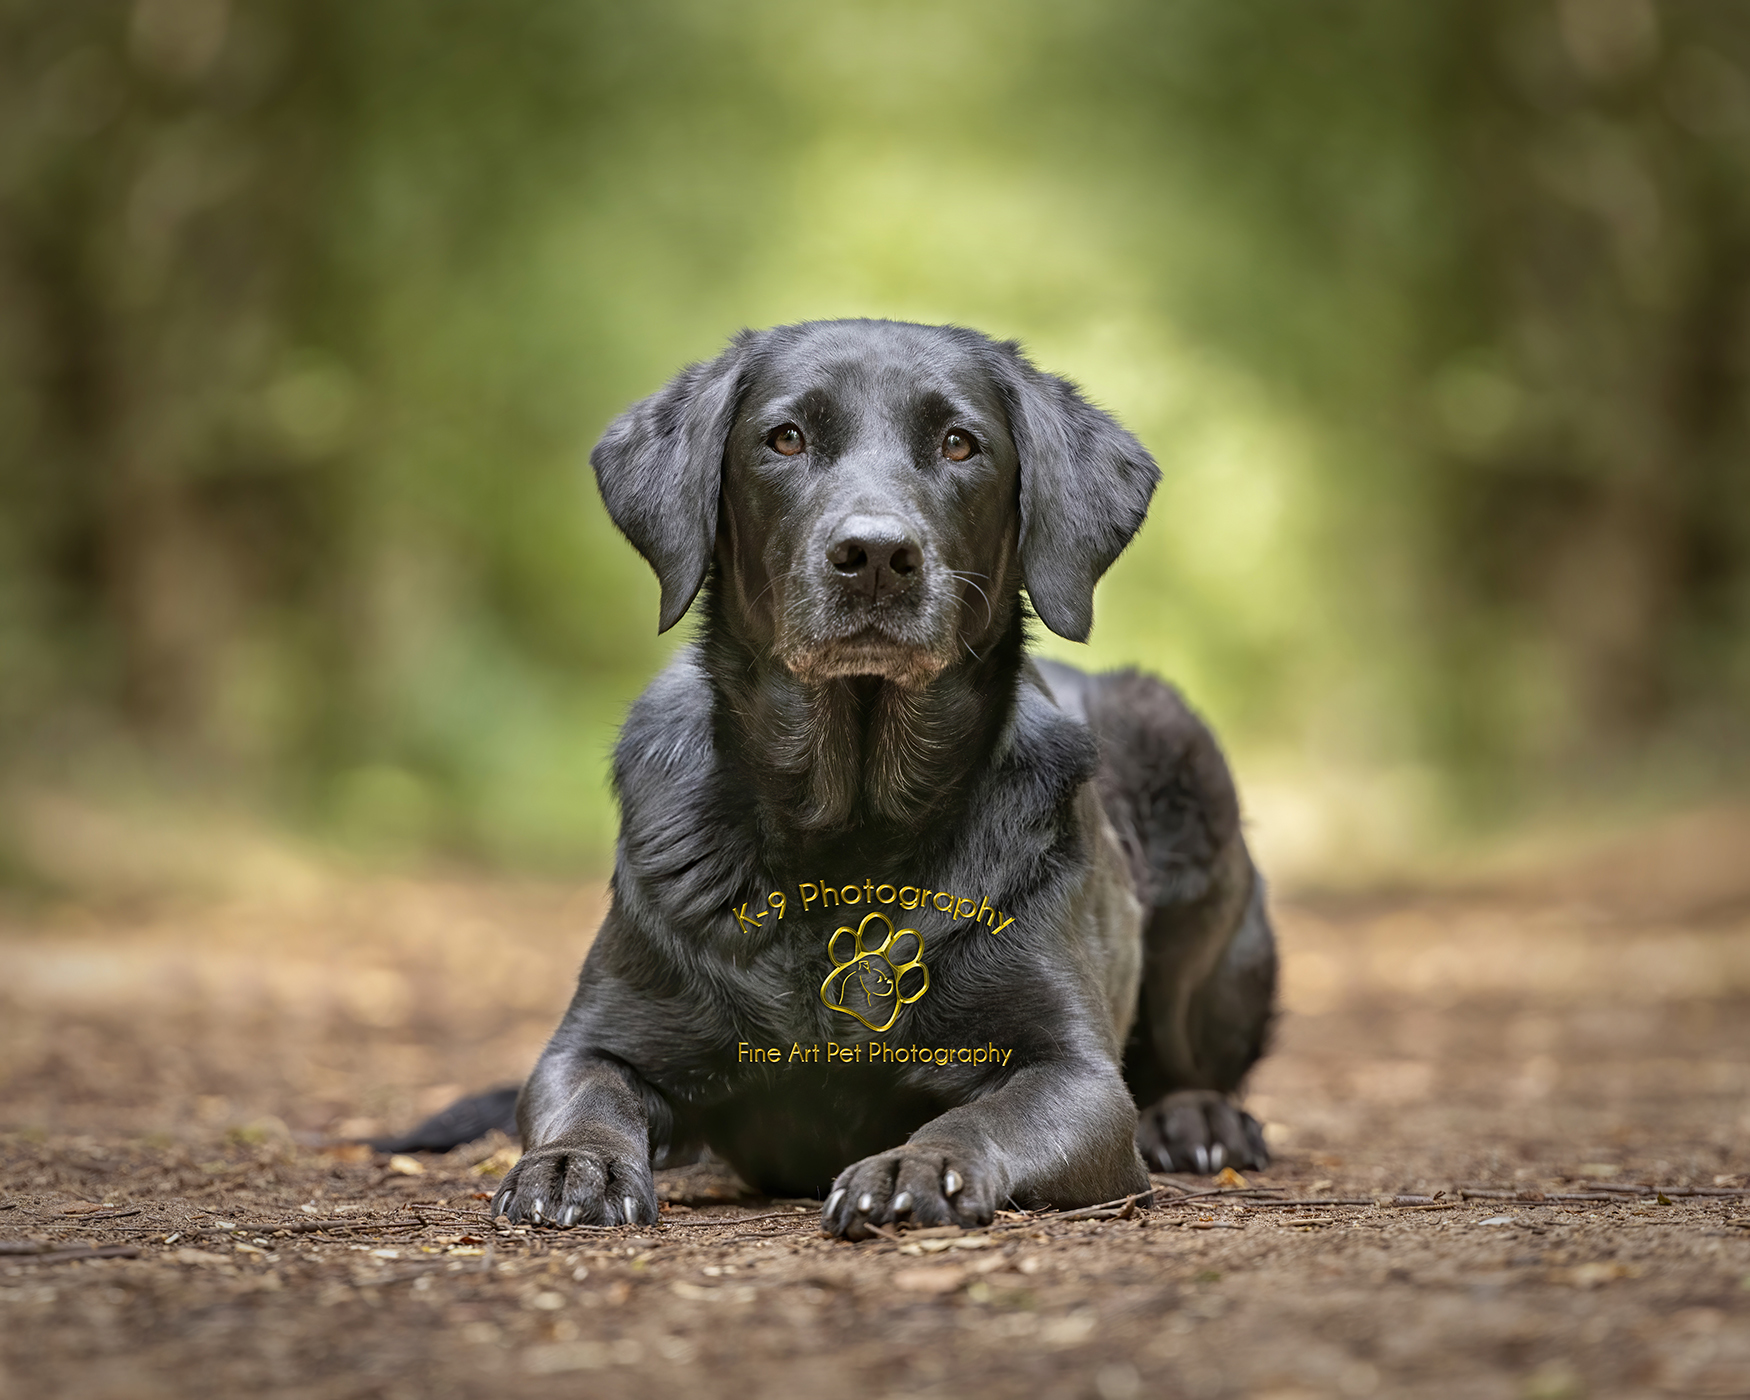 professional pet photography in Bedfordshire by Adrian Bullers | this beautiful Labrador was photographed on location by Bedford Pet photographer Adrian Bullers